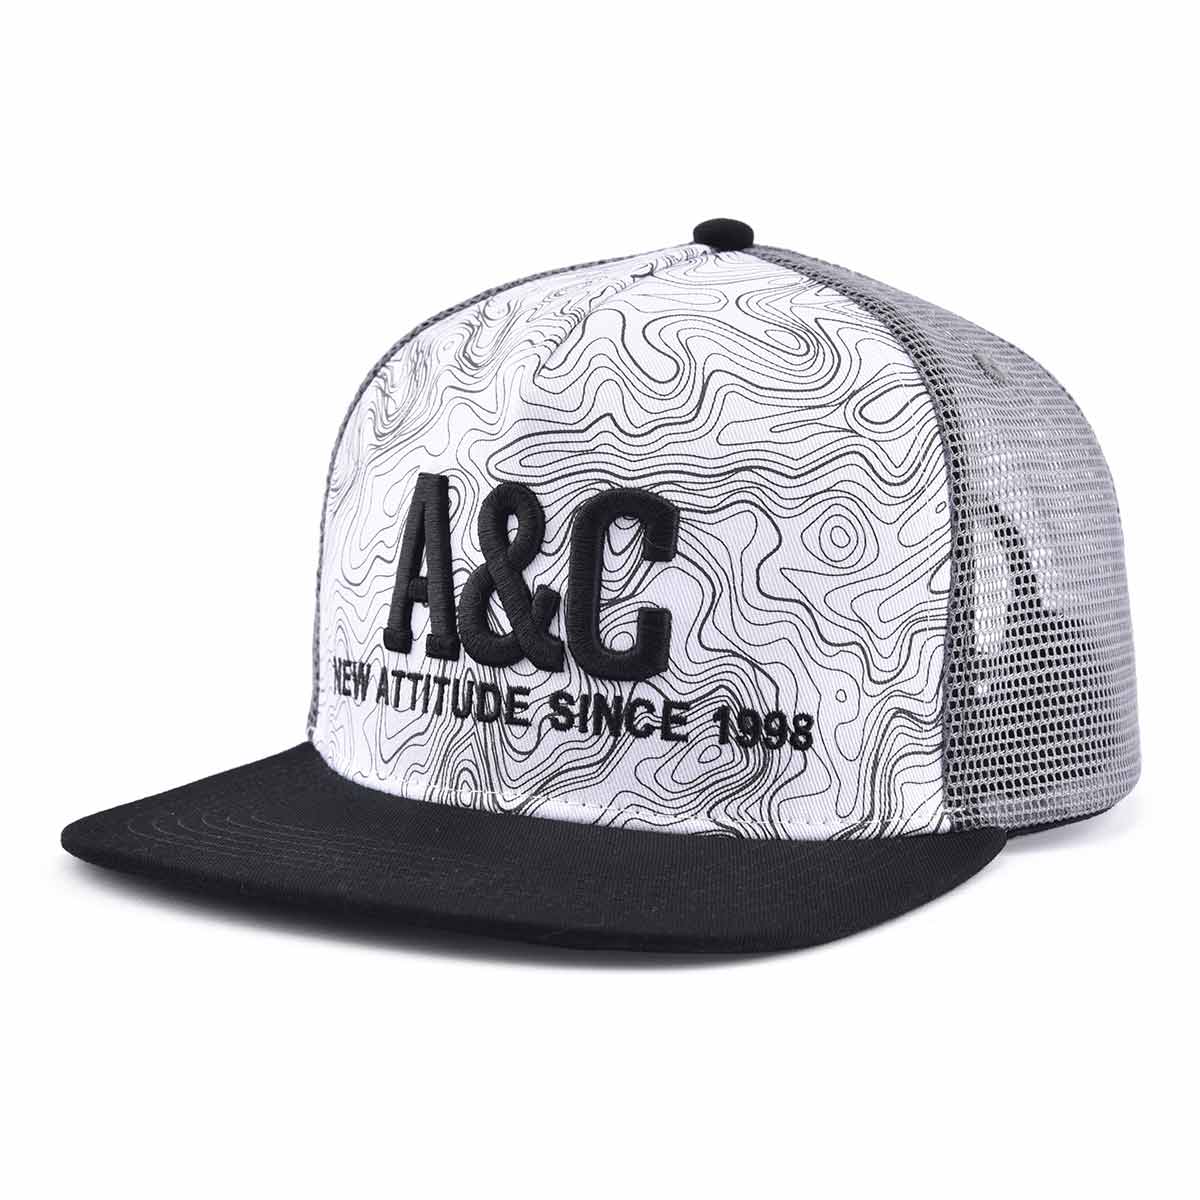 Aung Crown fashion white and black trucker hat for women and men KN2103033